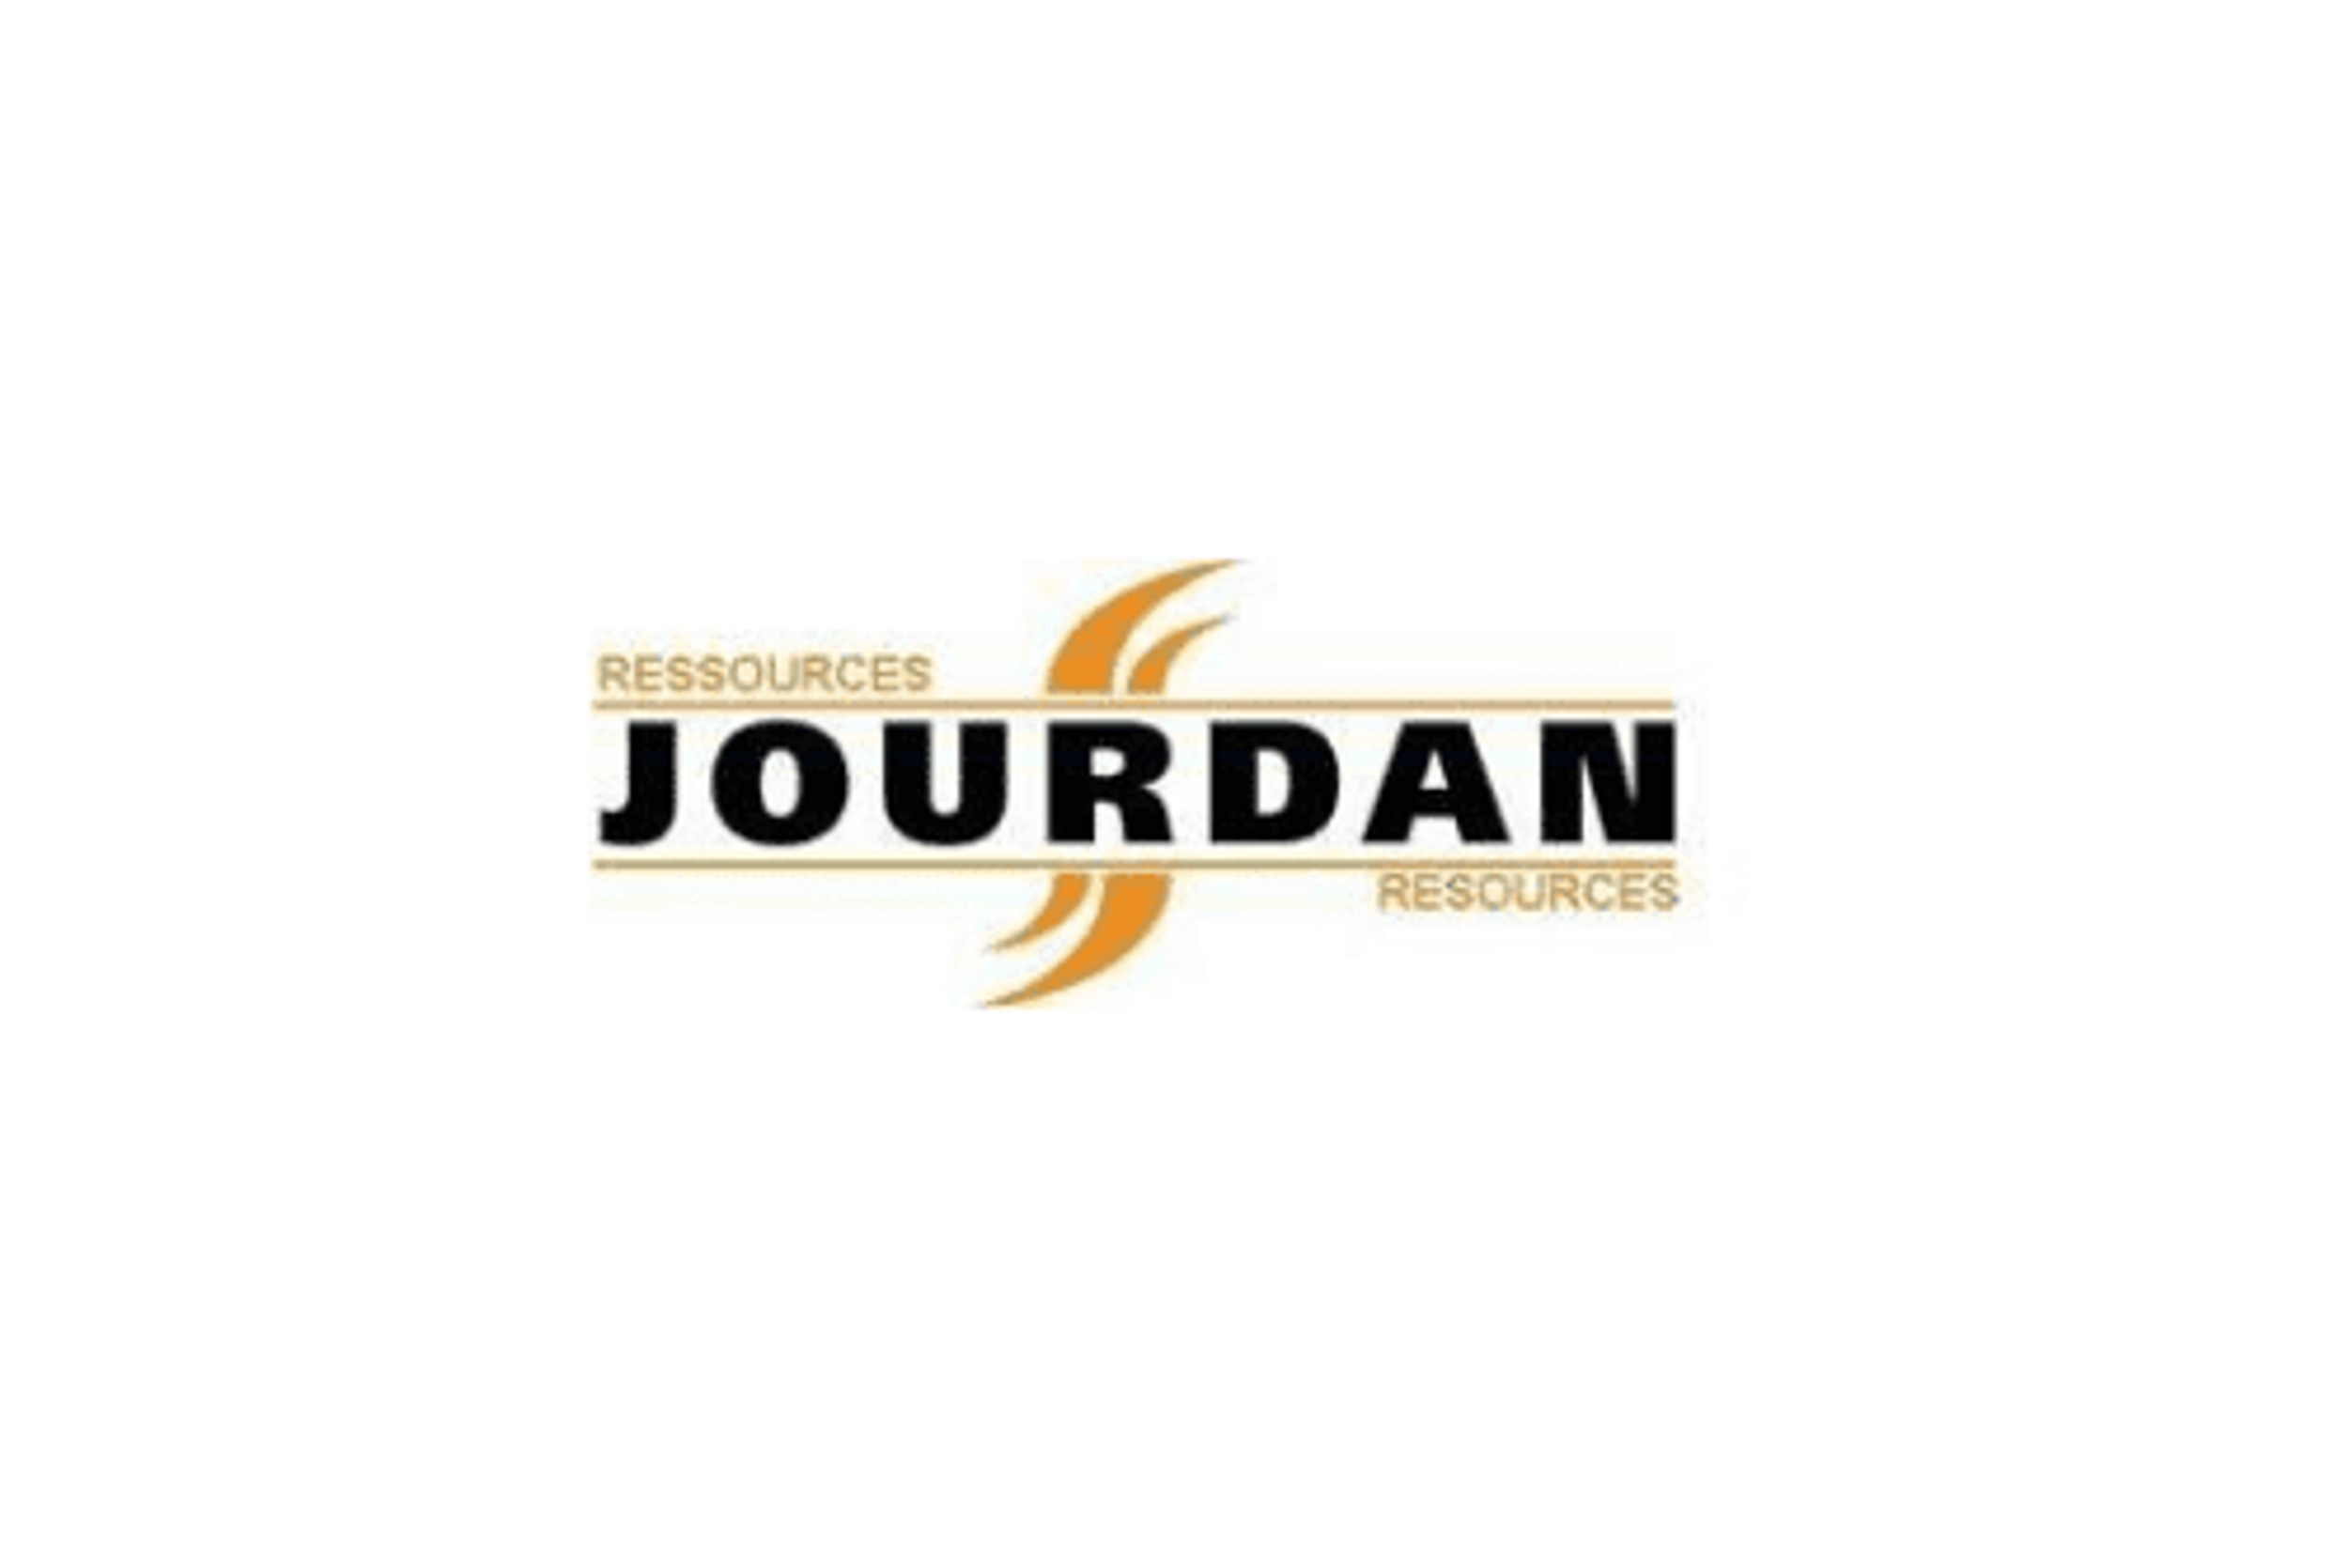 Jourdan Engages Stanford & Turner for Assistance with Marketing Campaign